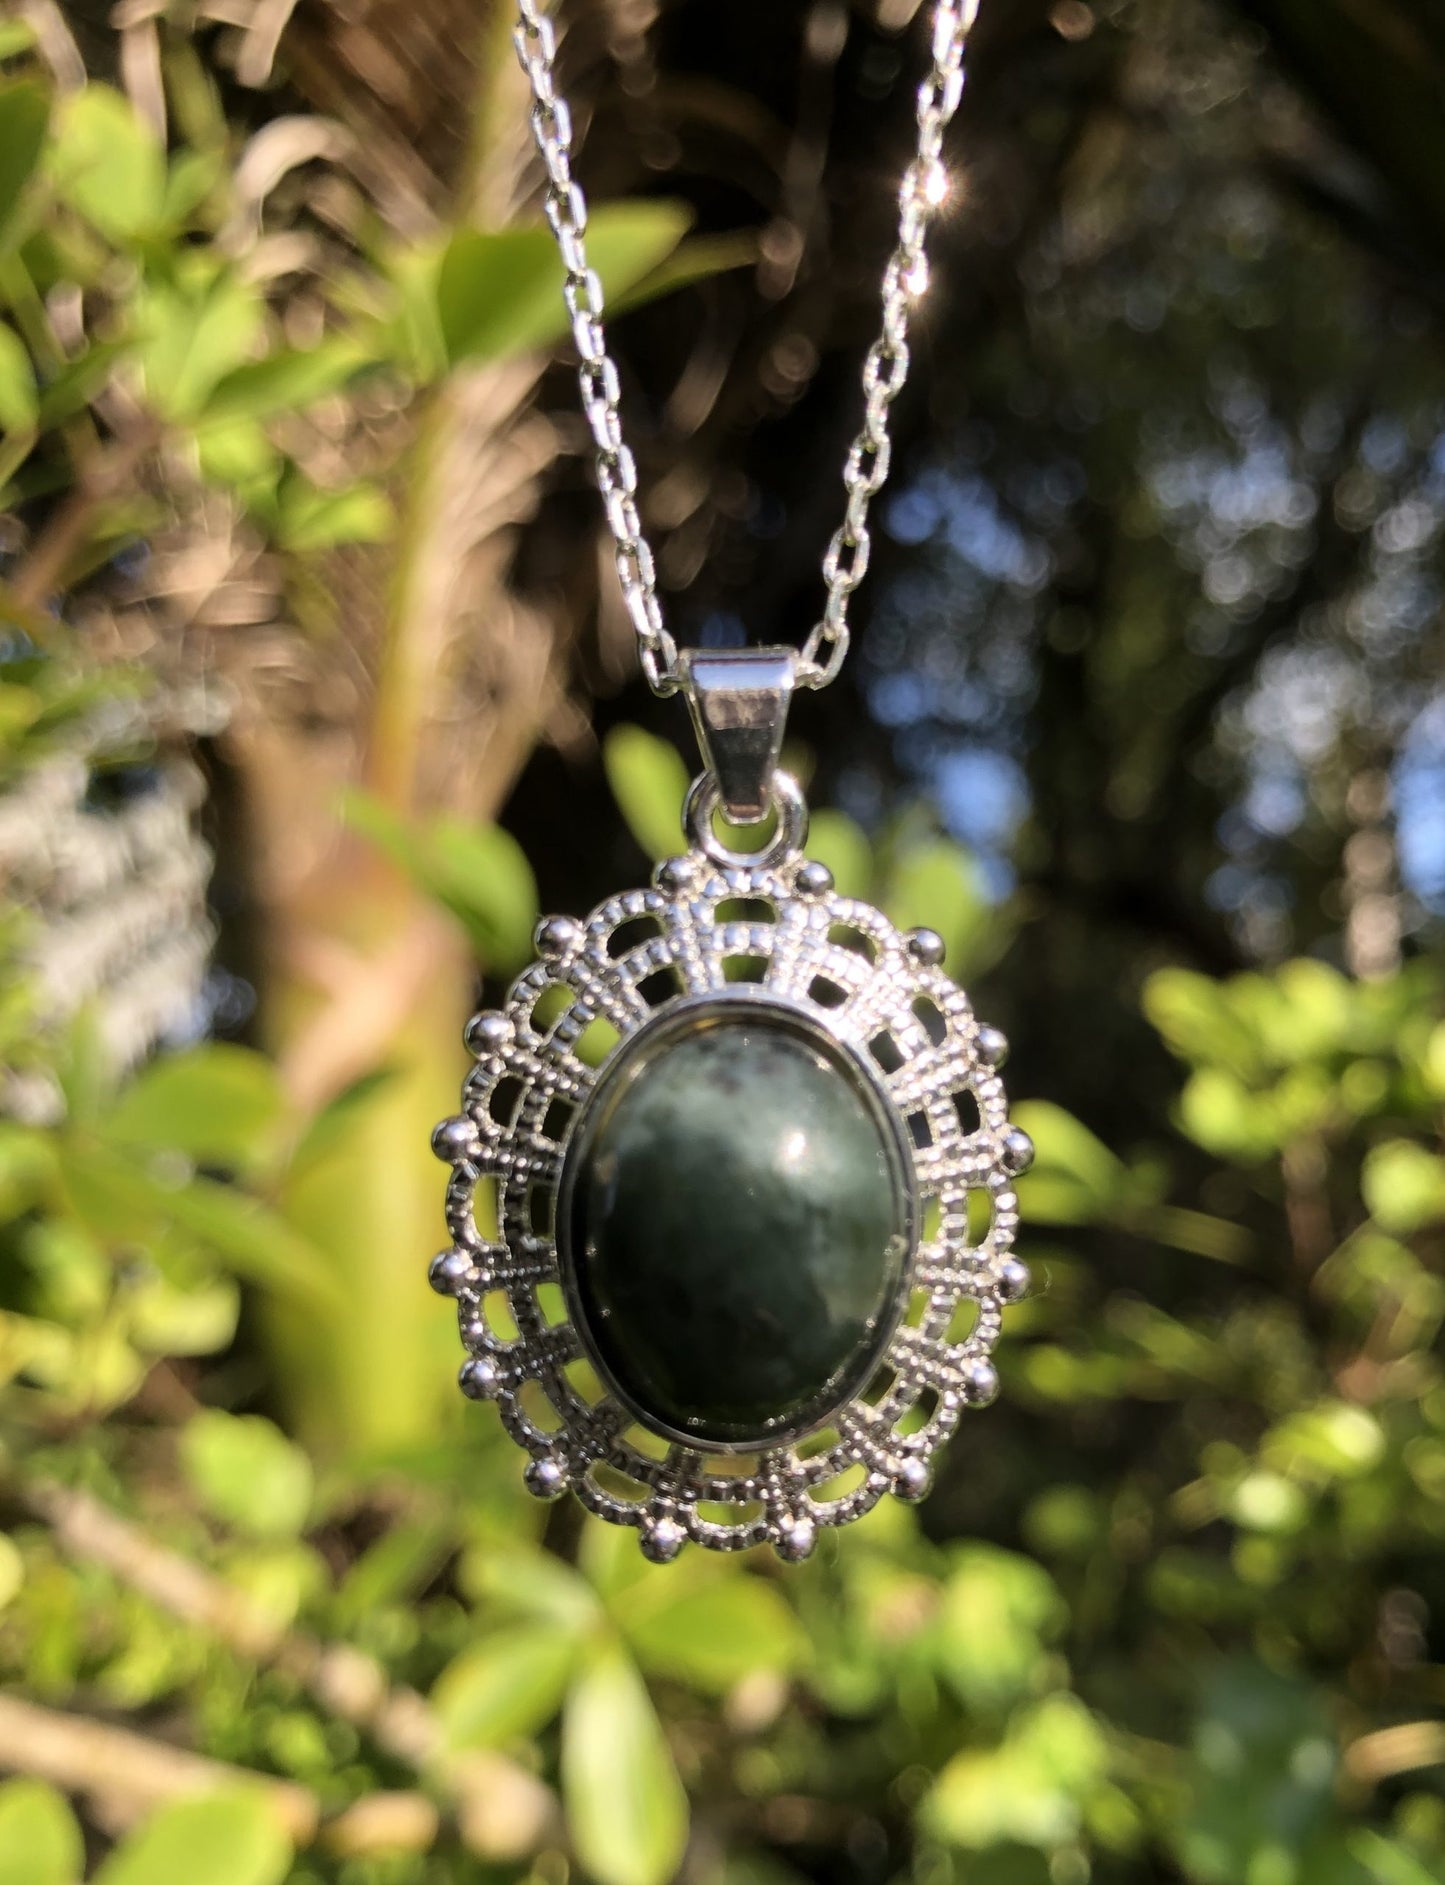 Necklace with New Zealand Pounamu (Greenstone, nephrite jade), dark green with mysterious markings, hand polished to an 18x13mm cabochon and mounted in a silver plated setting with 19 inch chain.